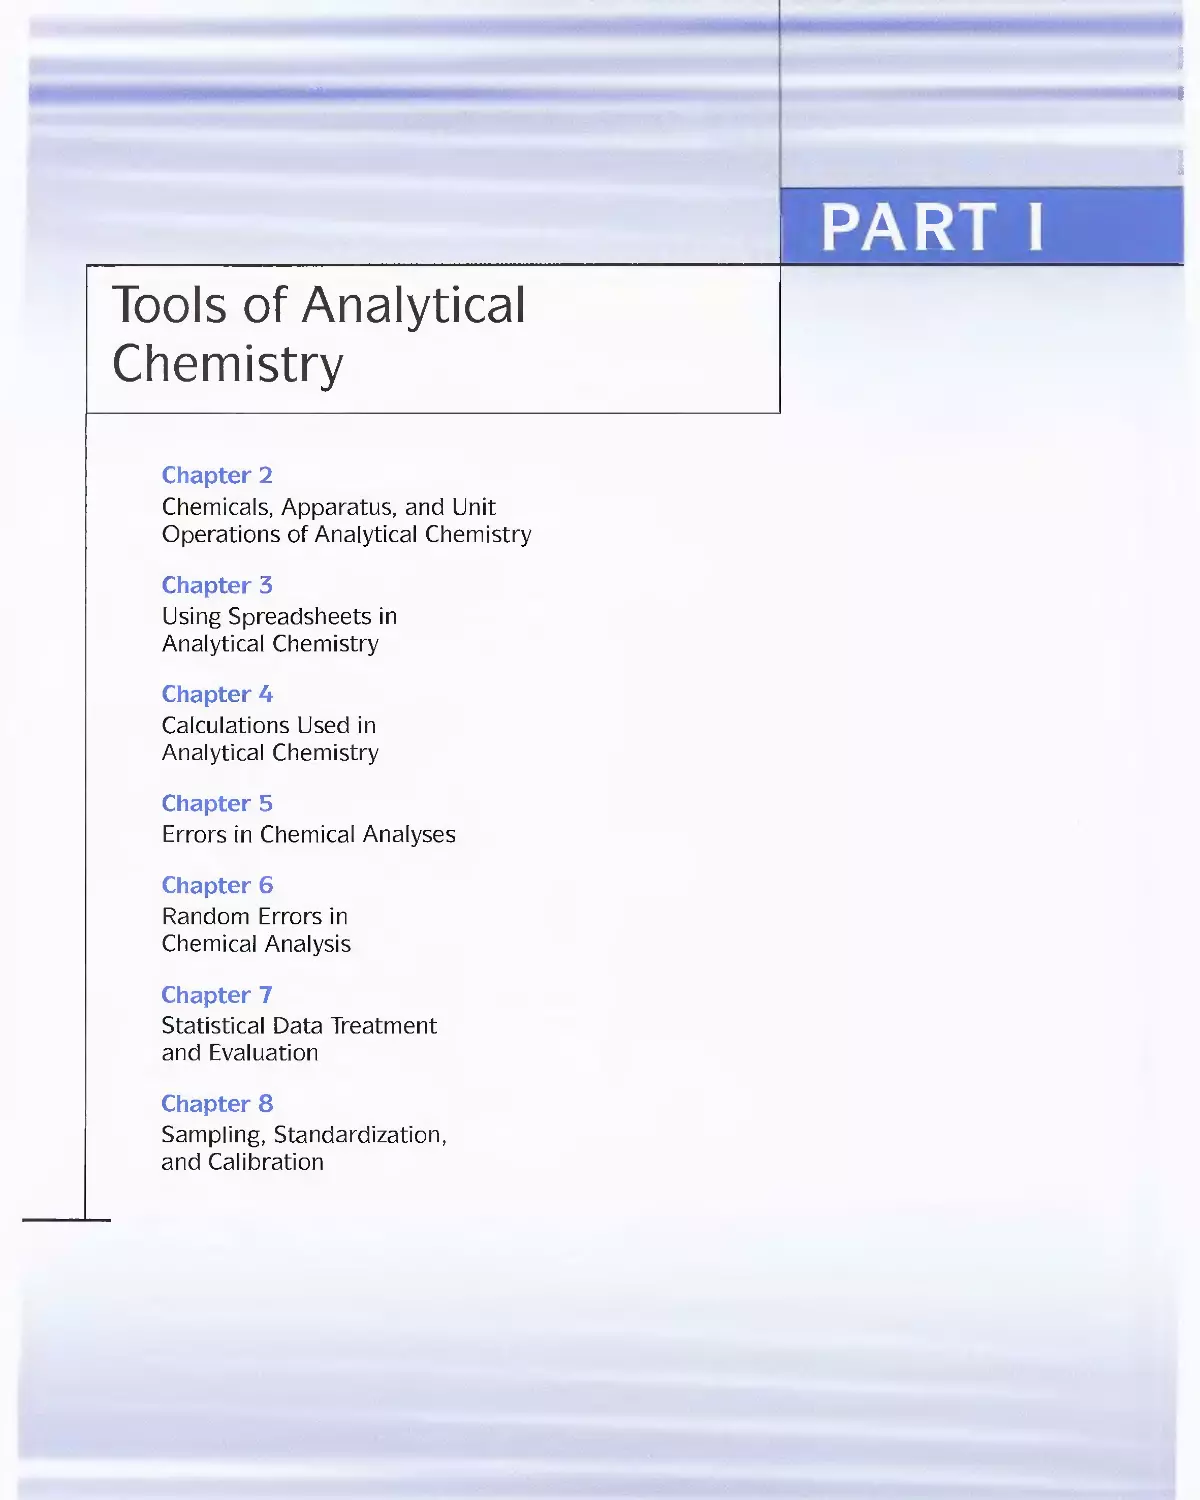 Part 1 - Tools of Analytical Chemistry